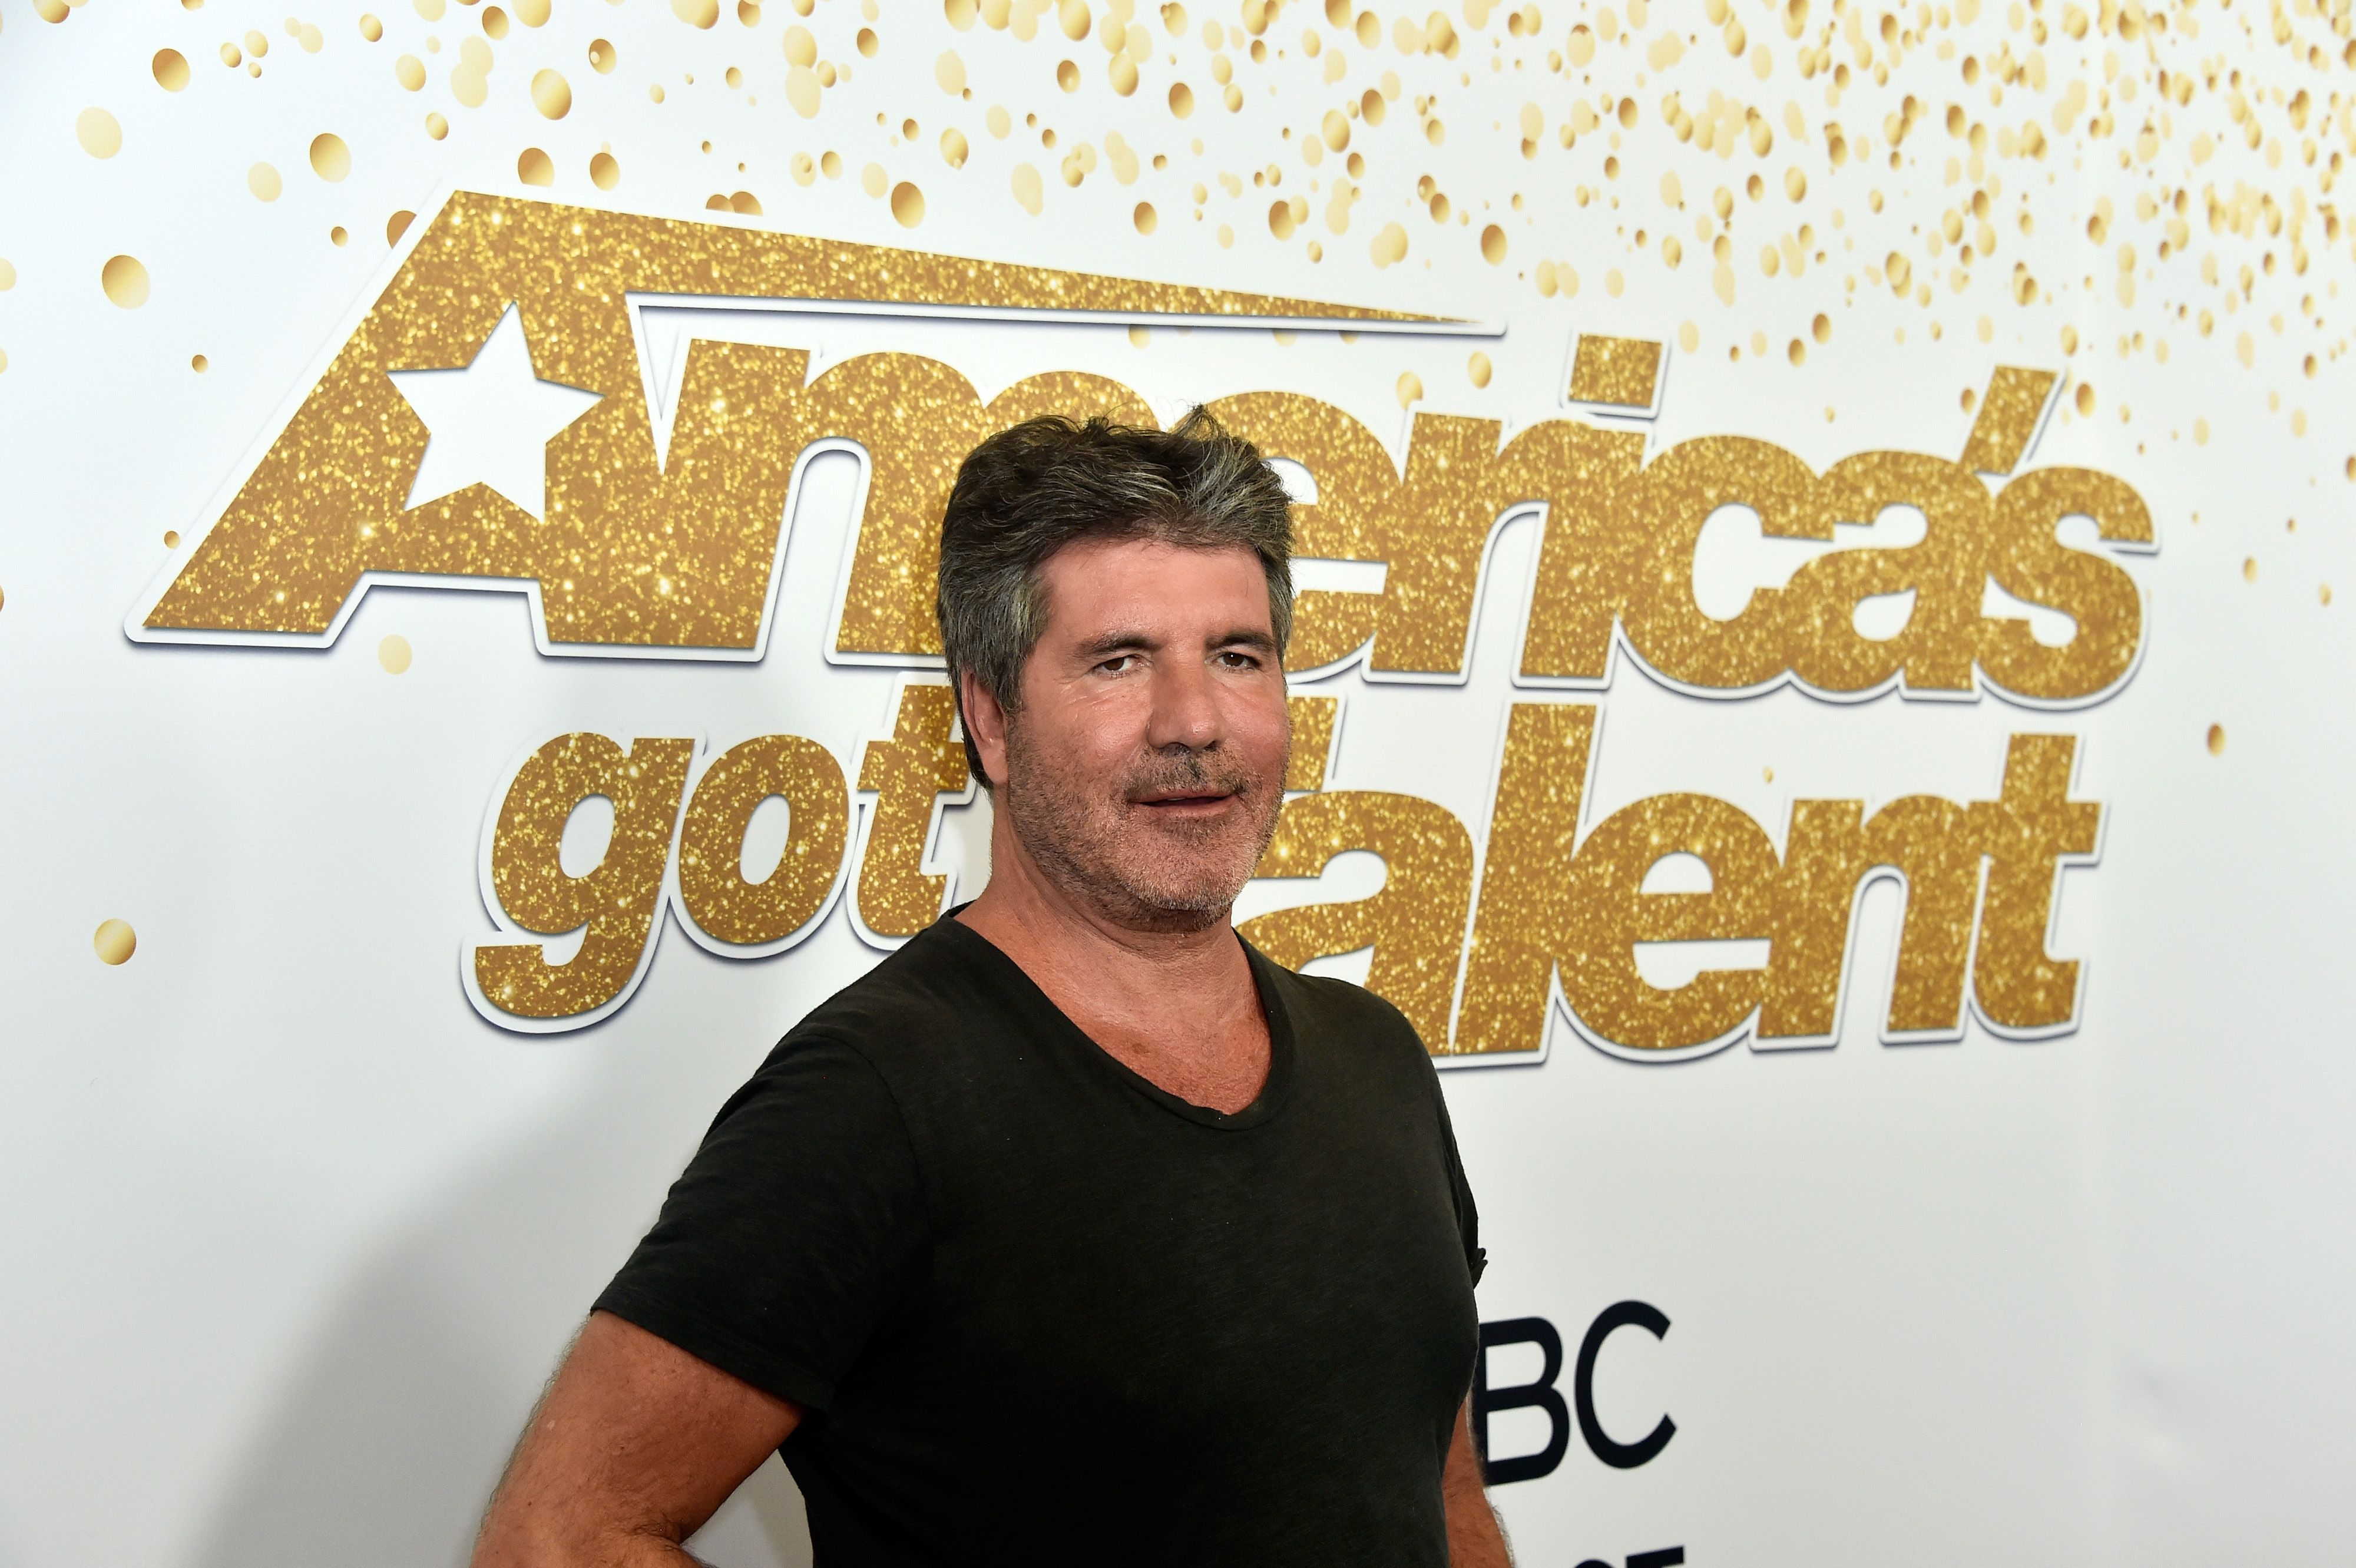 Simon Cowell at the "America's Got Talent" Season 13 Live Show at Dolby Theatre on August 14, 2018 | Photo: Getty Images